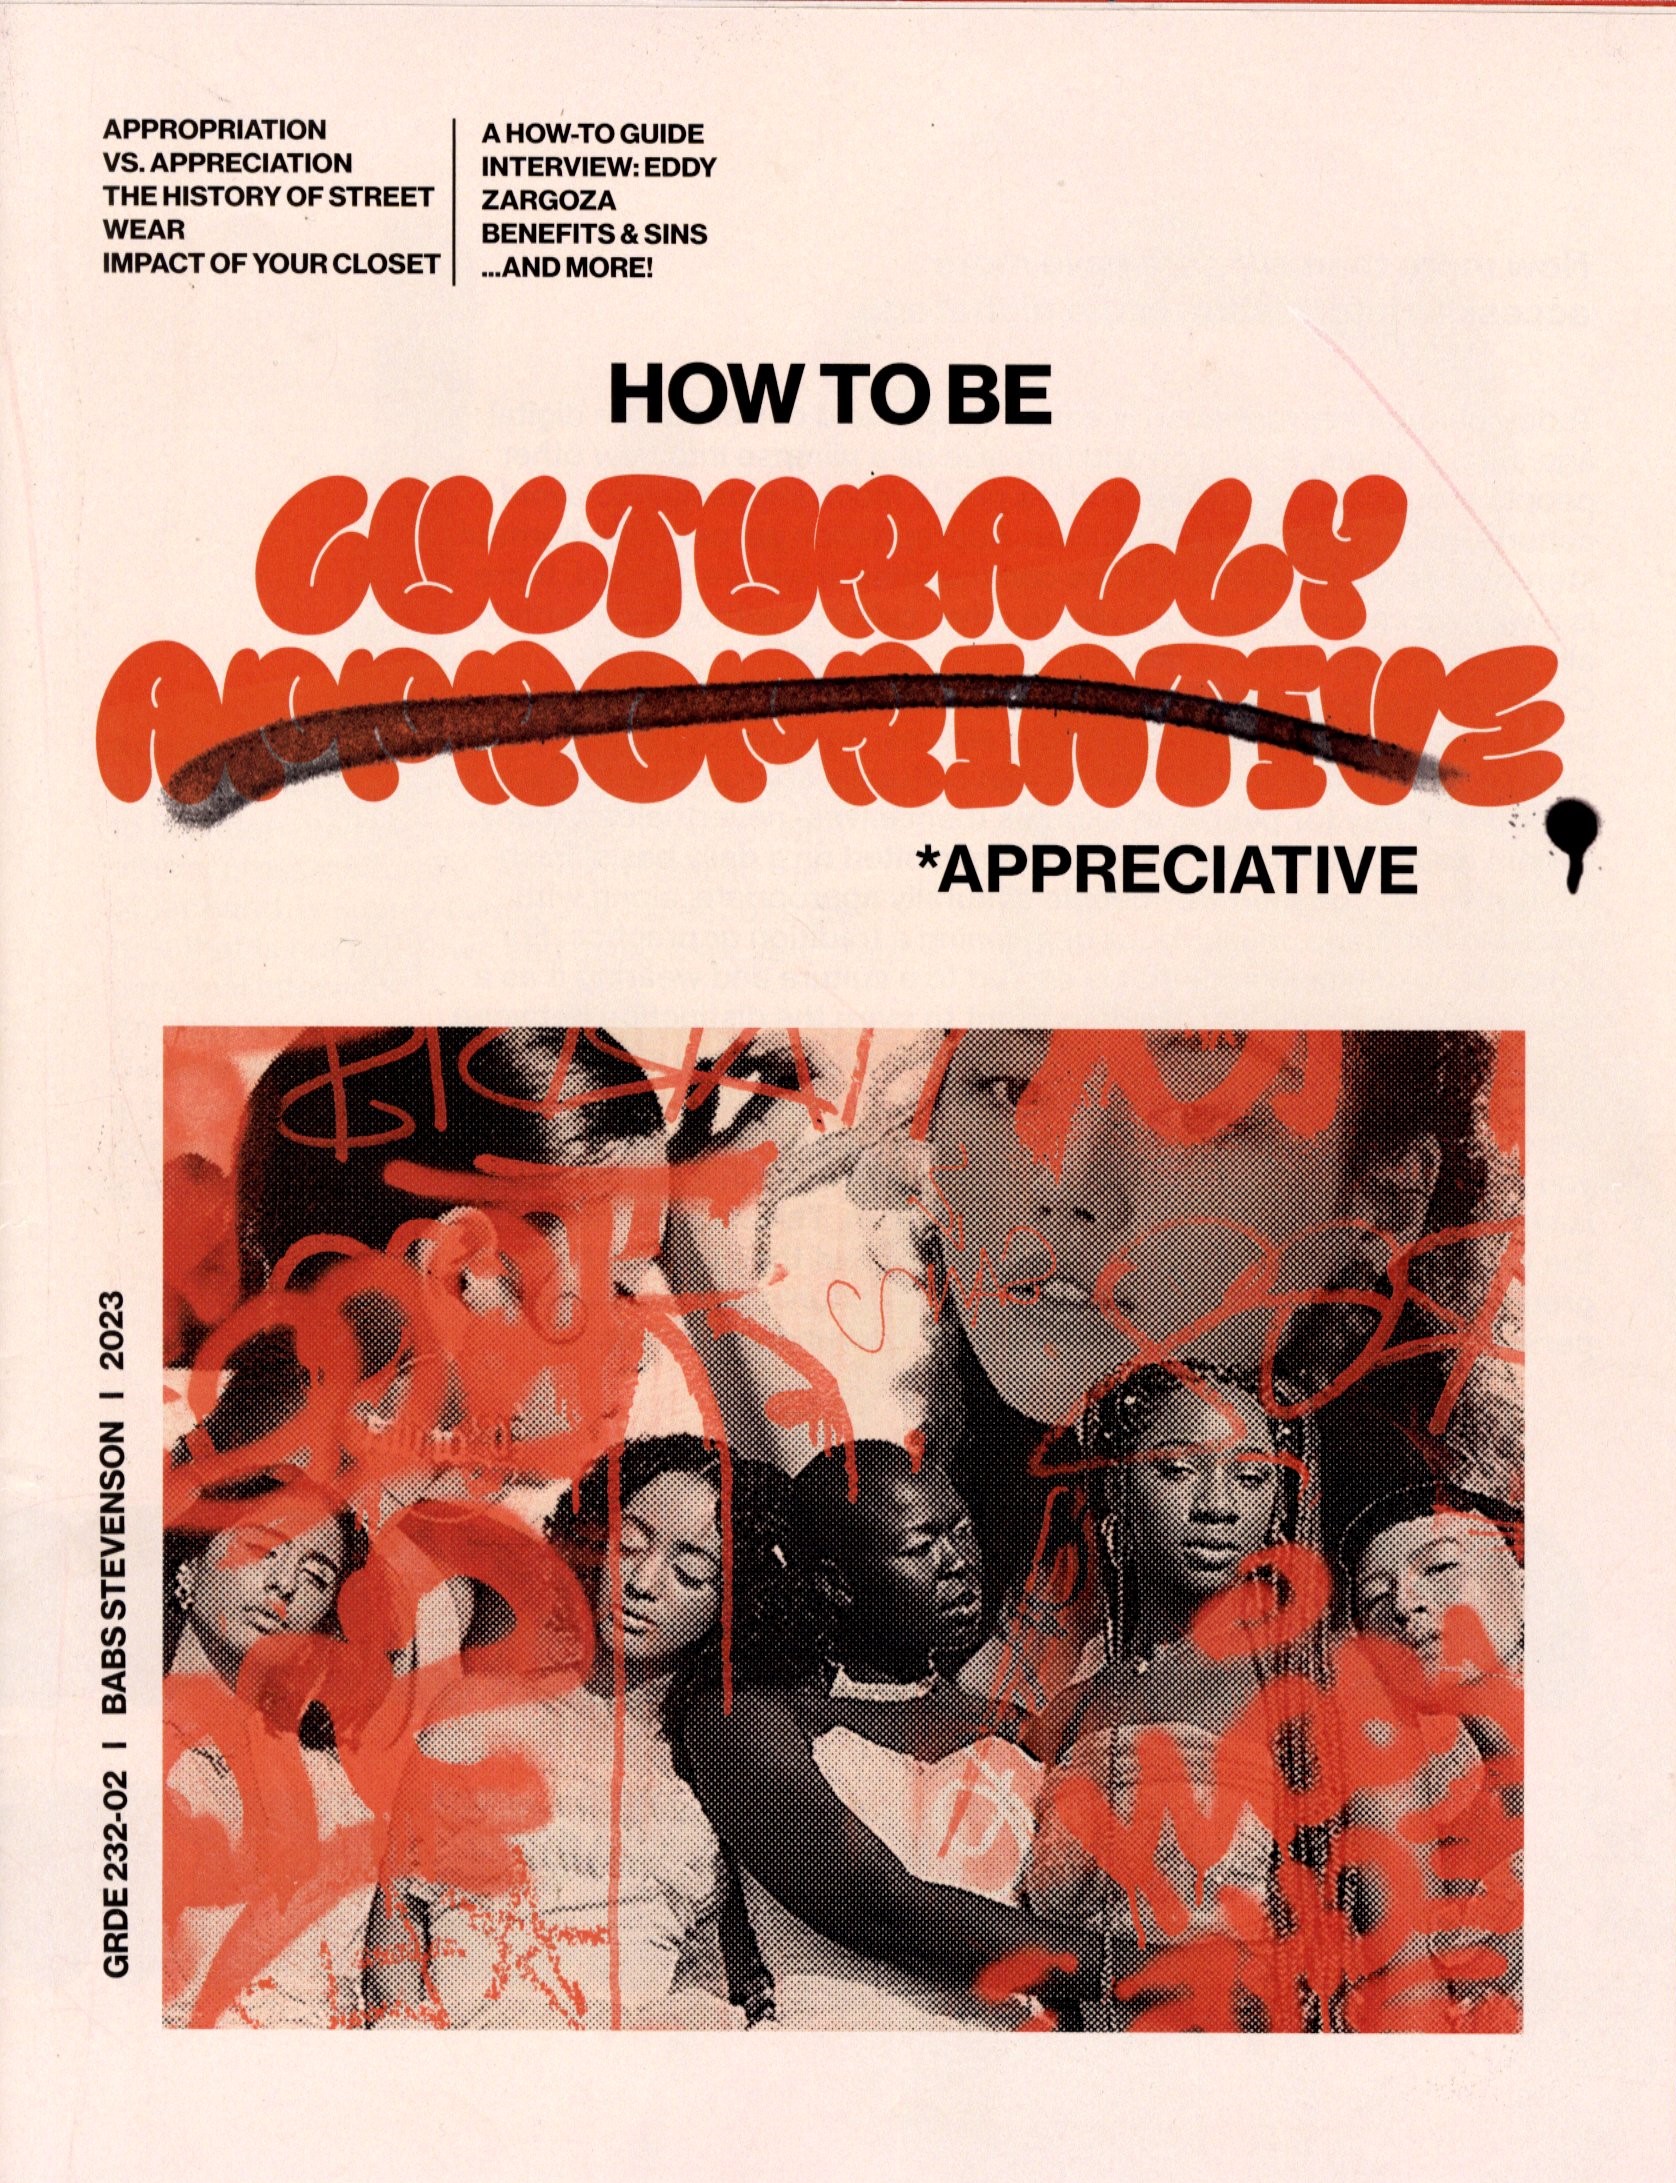 A digital print trompe l'oeil of a 70s era album cover showing a variety of women of color overlayed in graffiti. Above the title How to be Culturally Appropriative with Appropriative crossed out